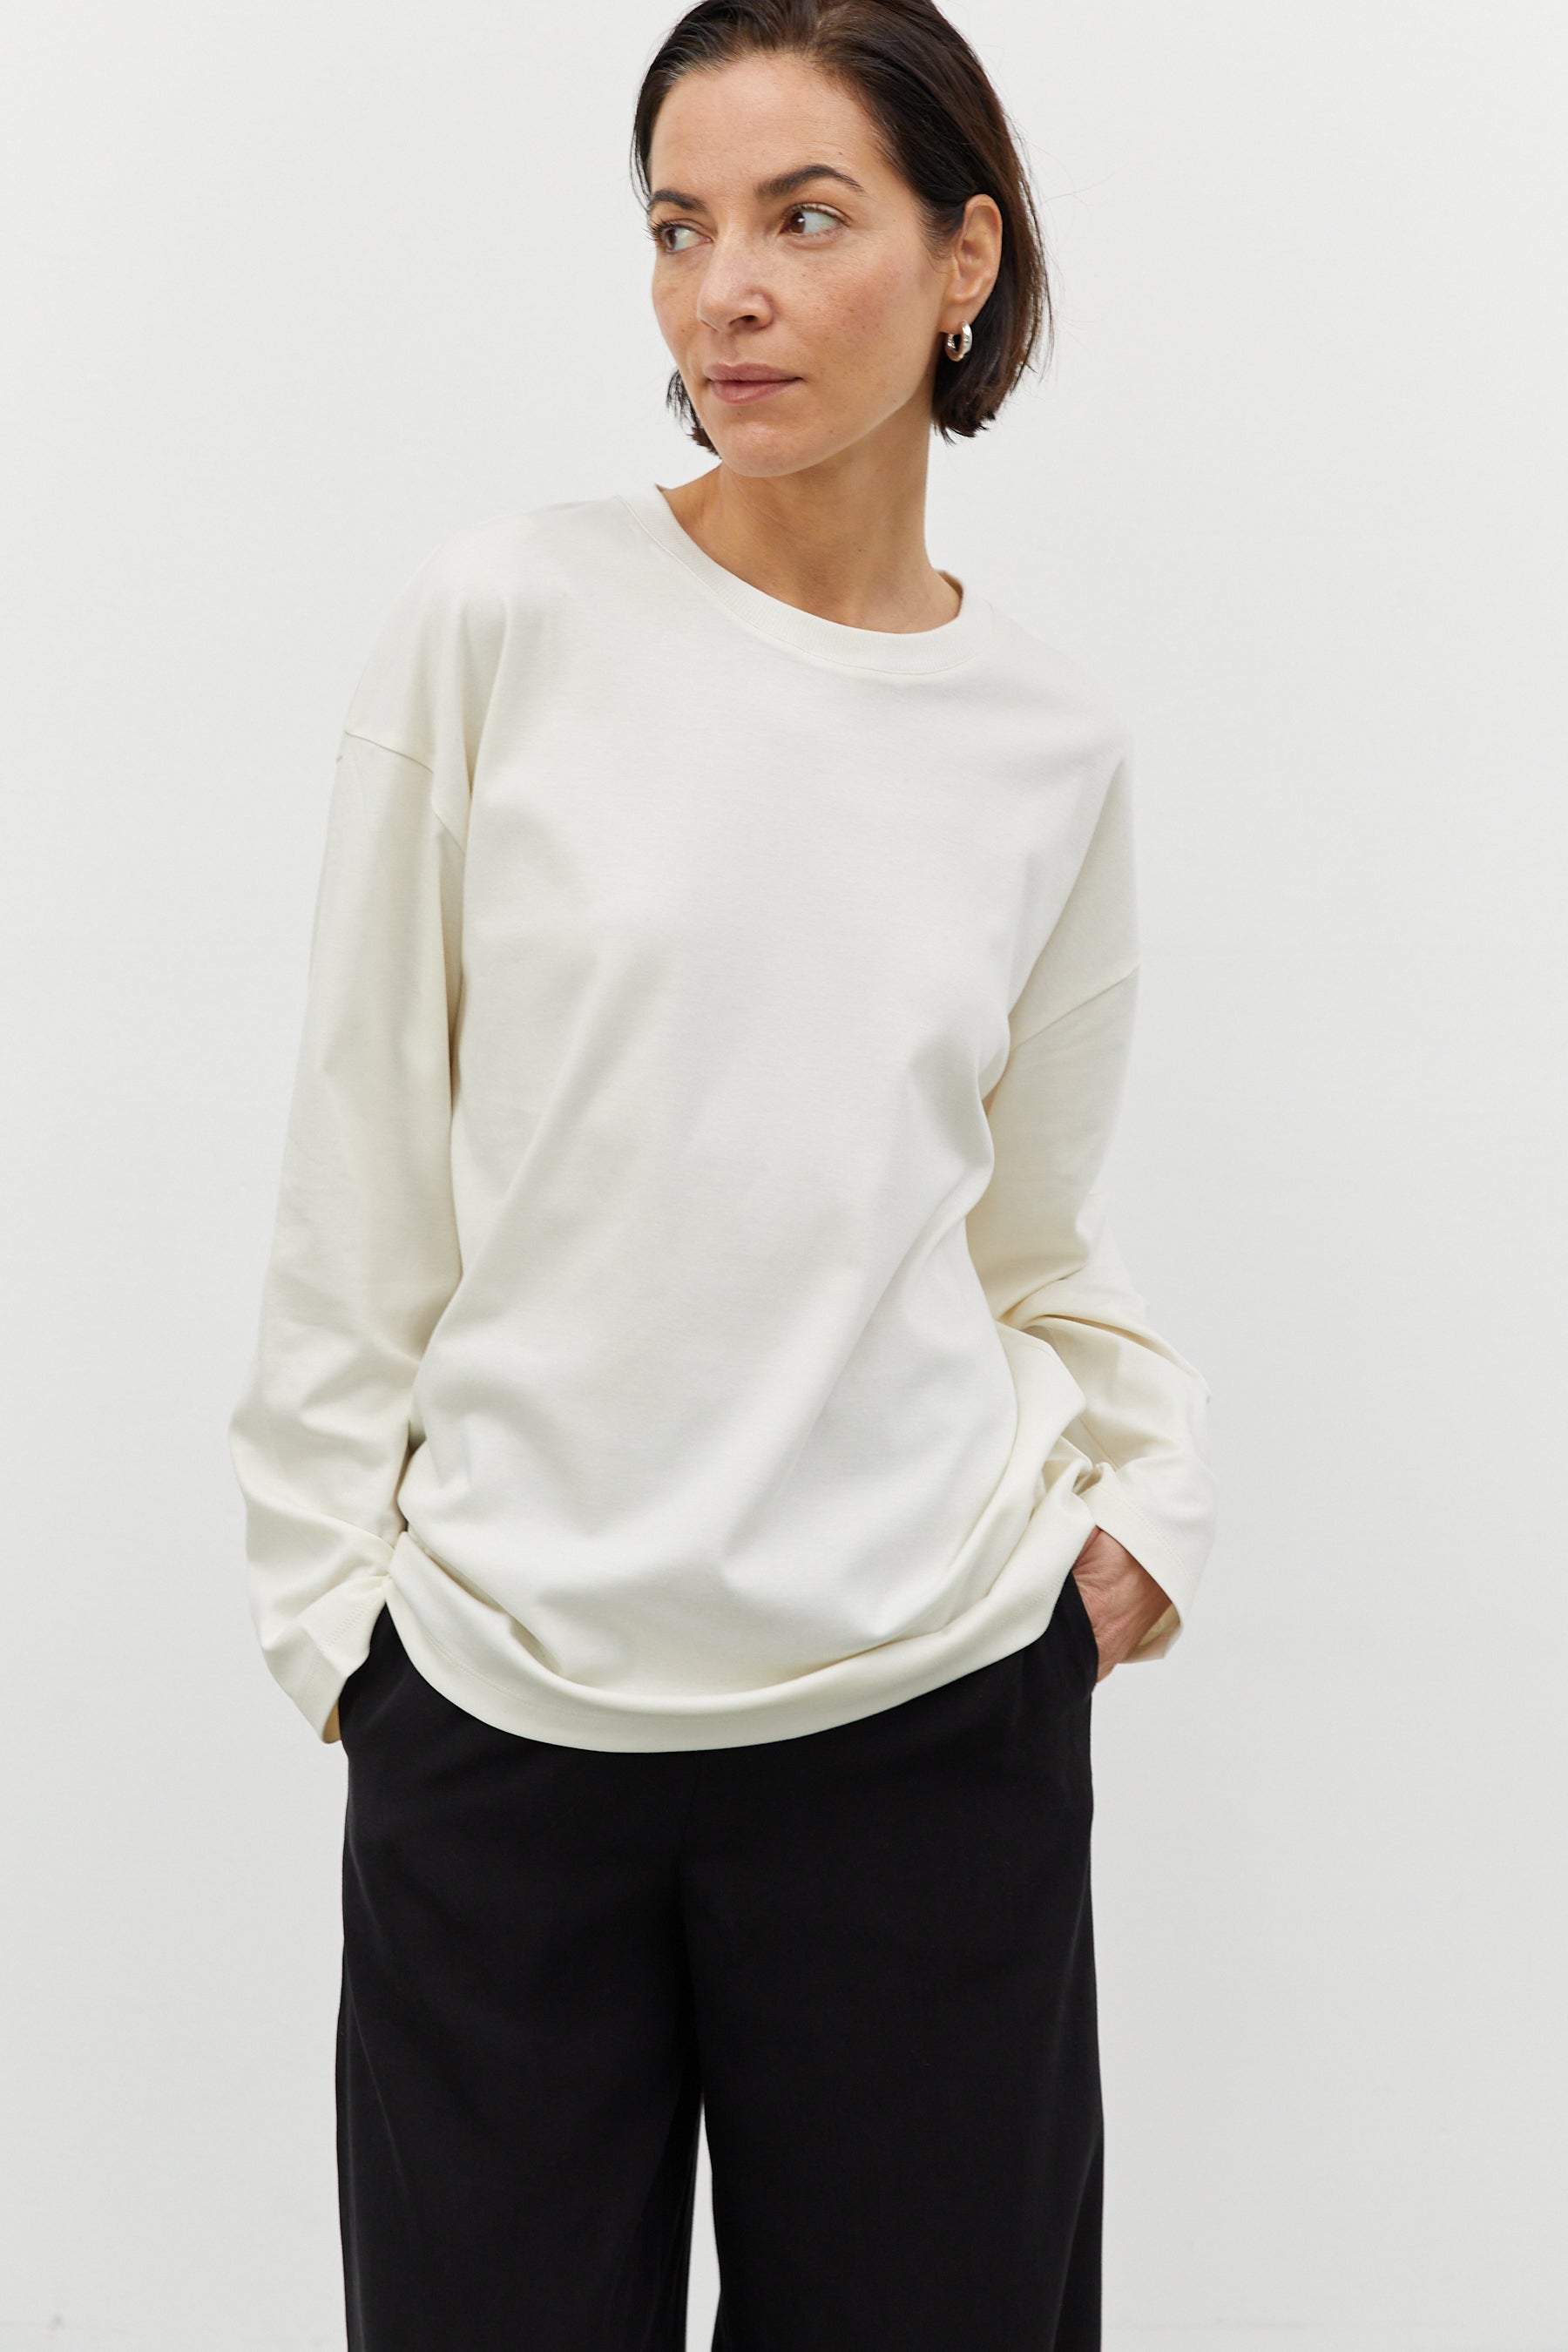 The Slow Label Long-Sleeve Tee